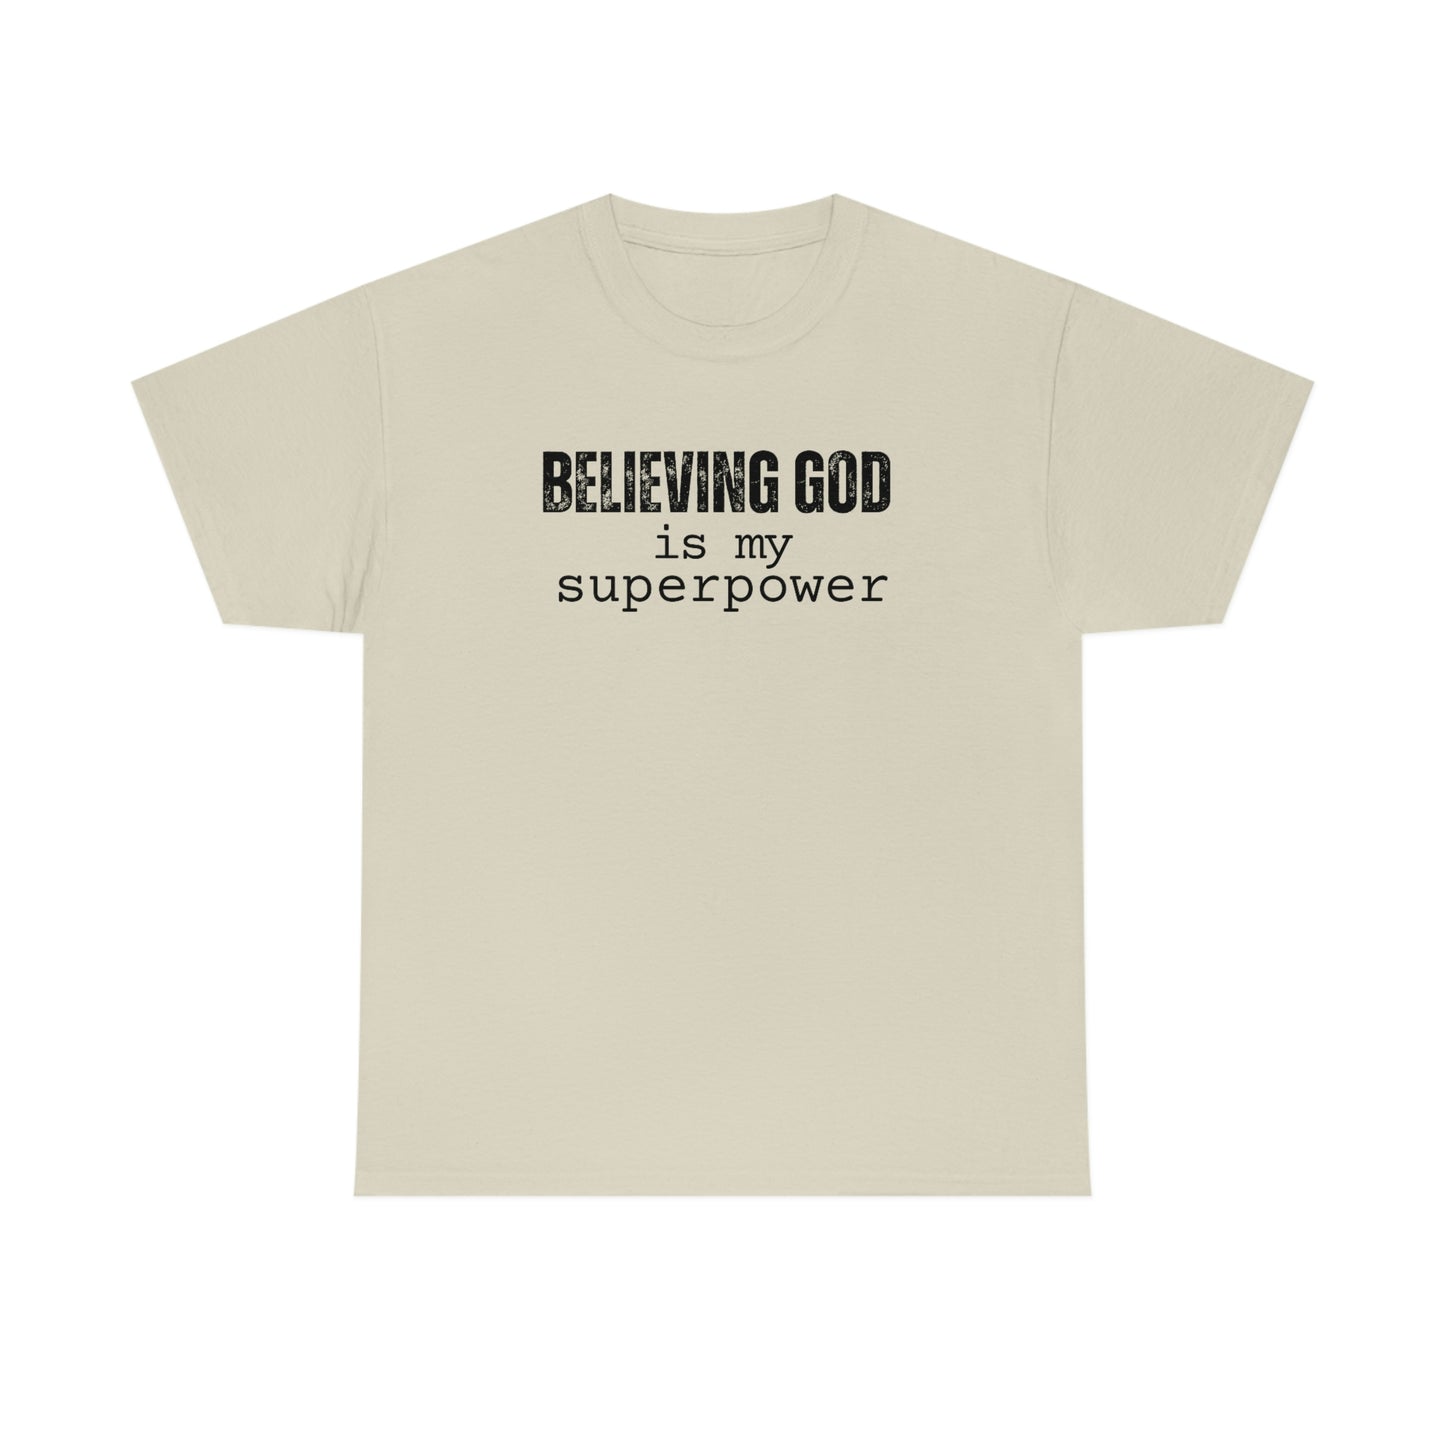 Believing God is My Superpower, Unisex T-Shirt, Faith Based, Christian Streetwear